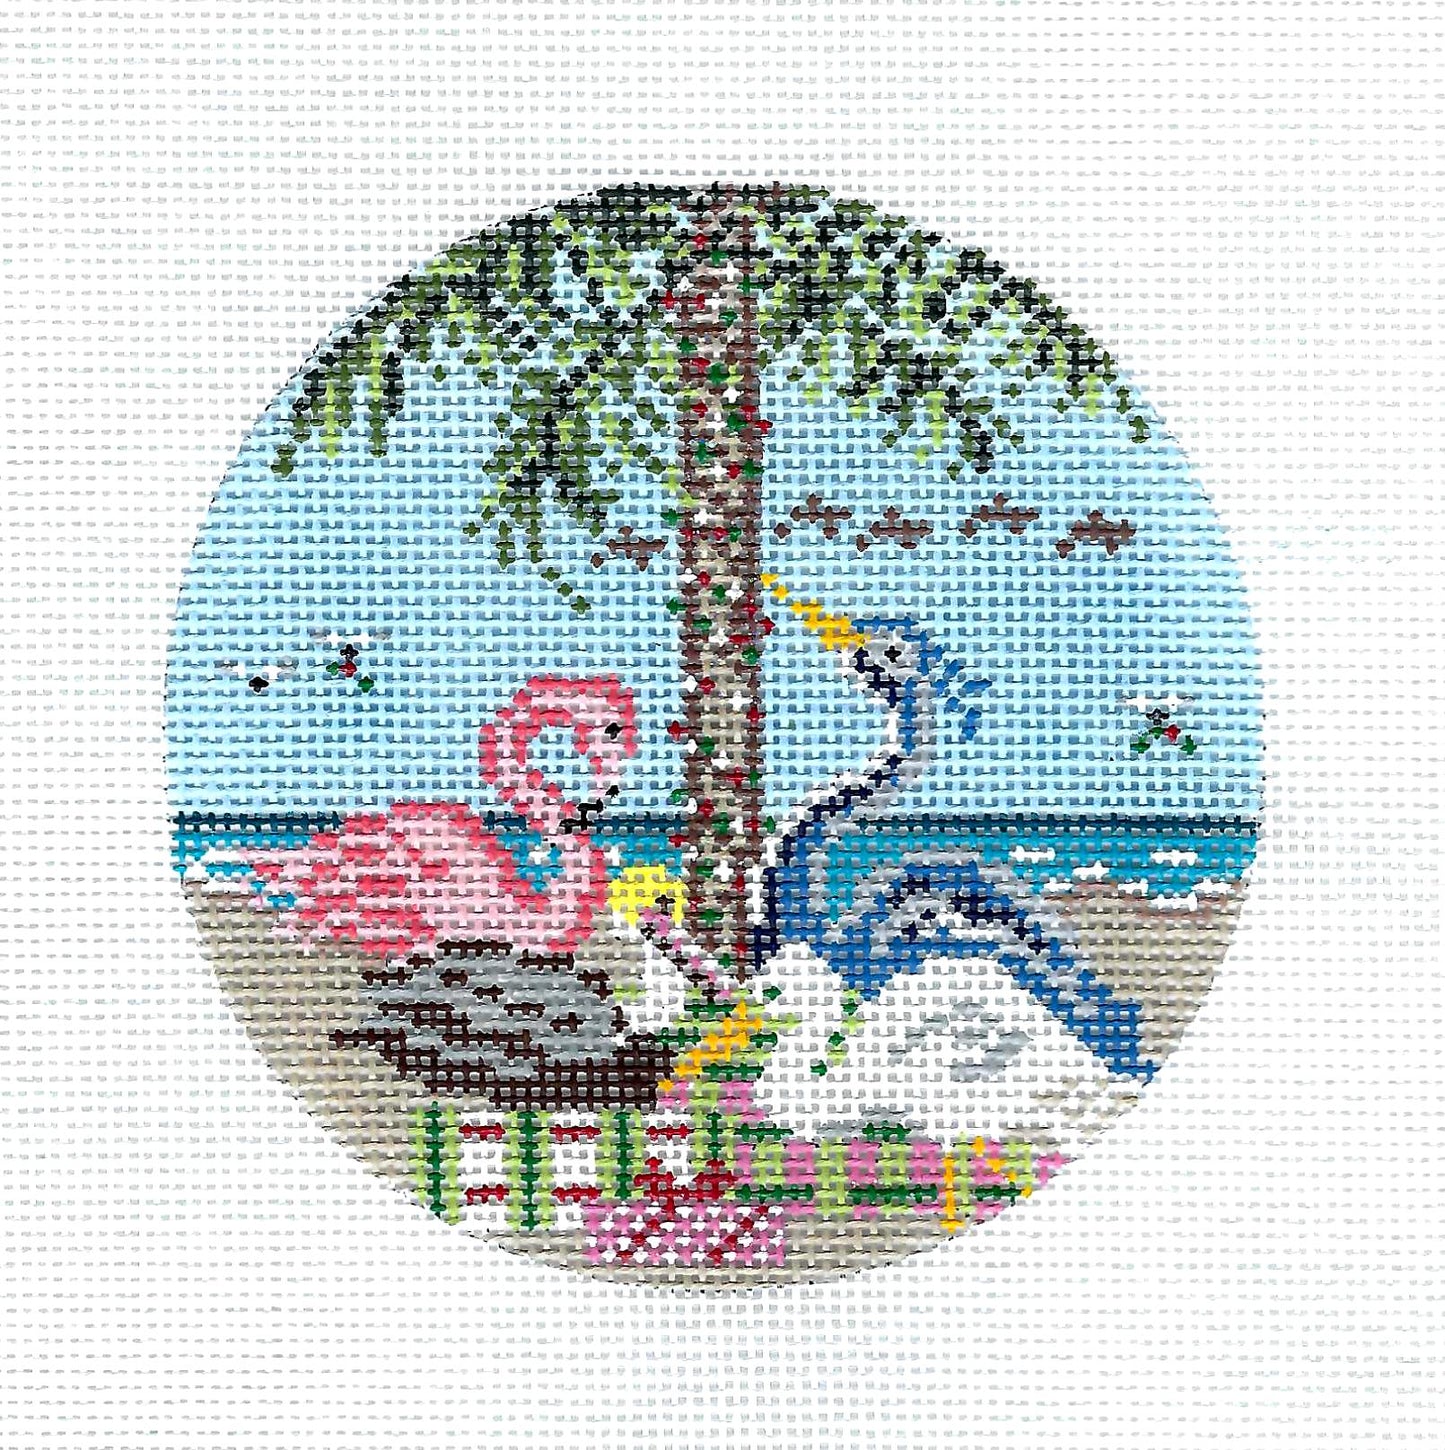 Birds Round ~ 4 Feathered Friends 4" Rd. handpainted 18m Needlepoint Canvas by Needle Crossings